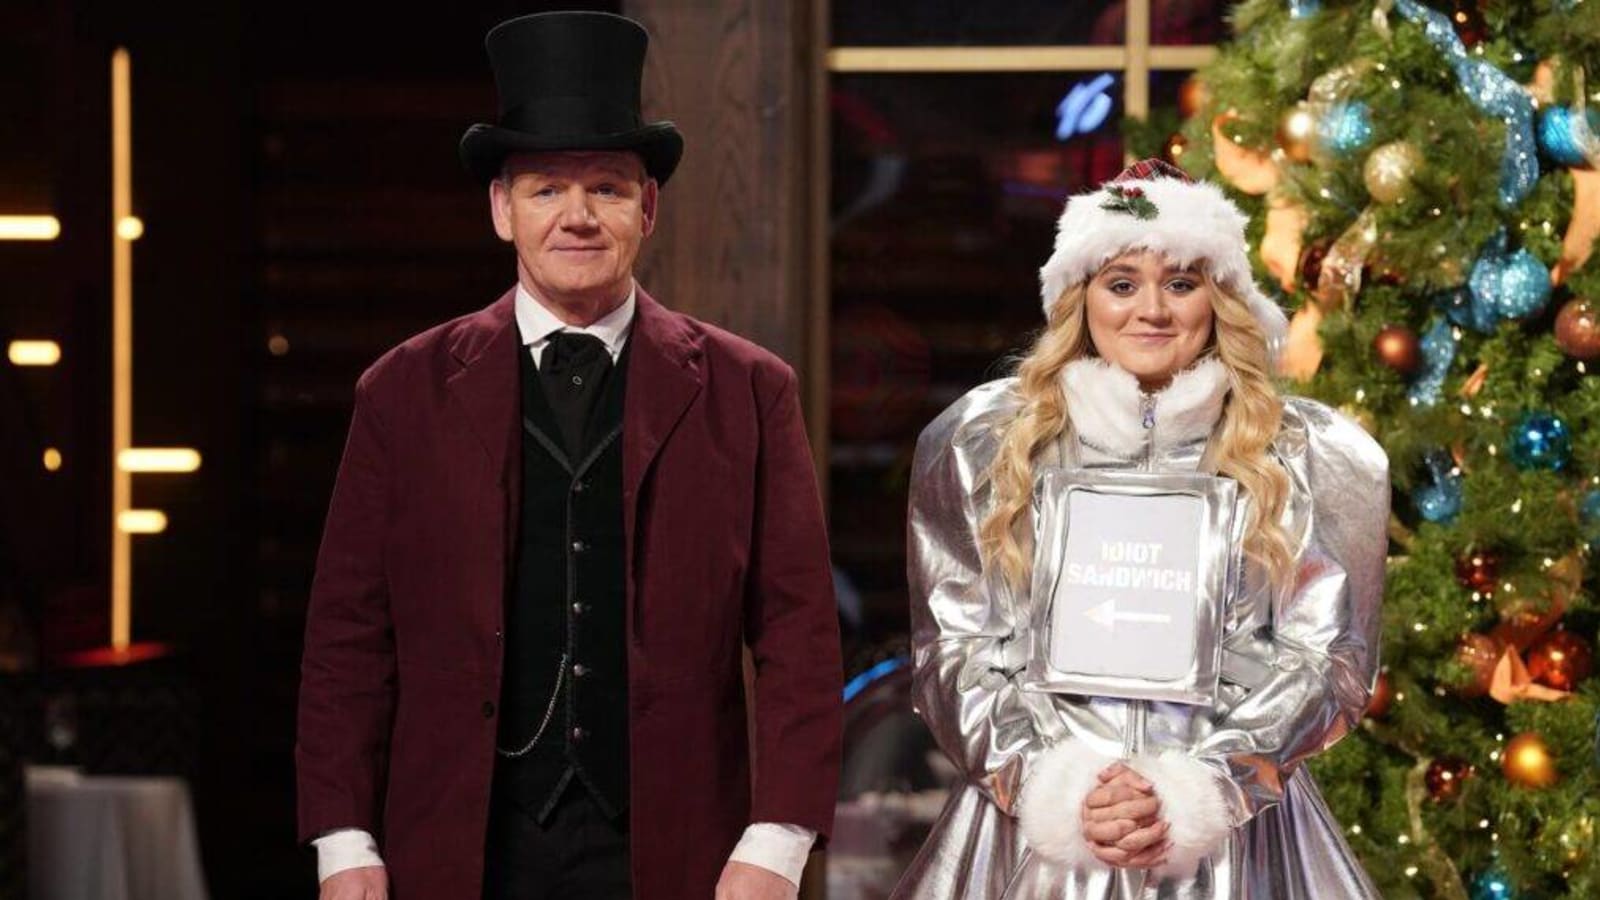 ‘MasterChef Junior’s Gordon Ramsay & Daughter Tilly Preview ‘Home for the Holidays’ Special